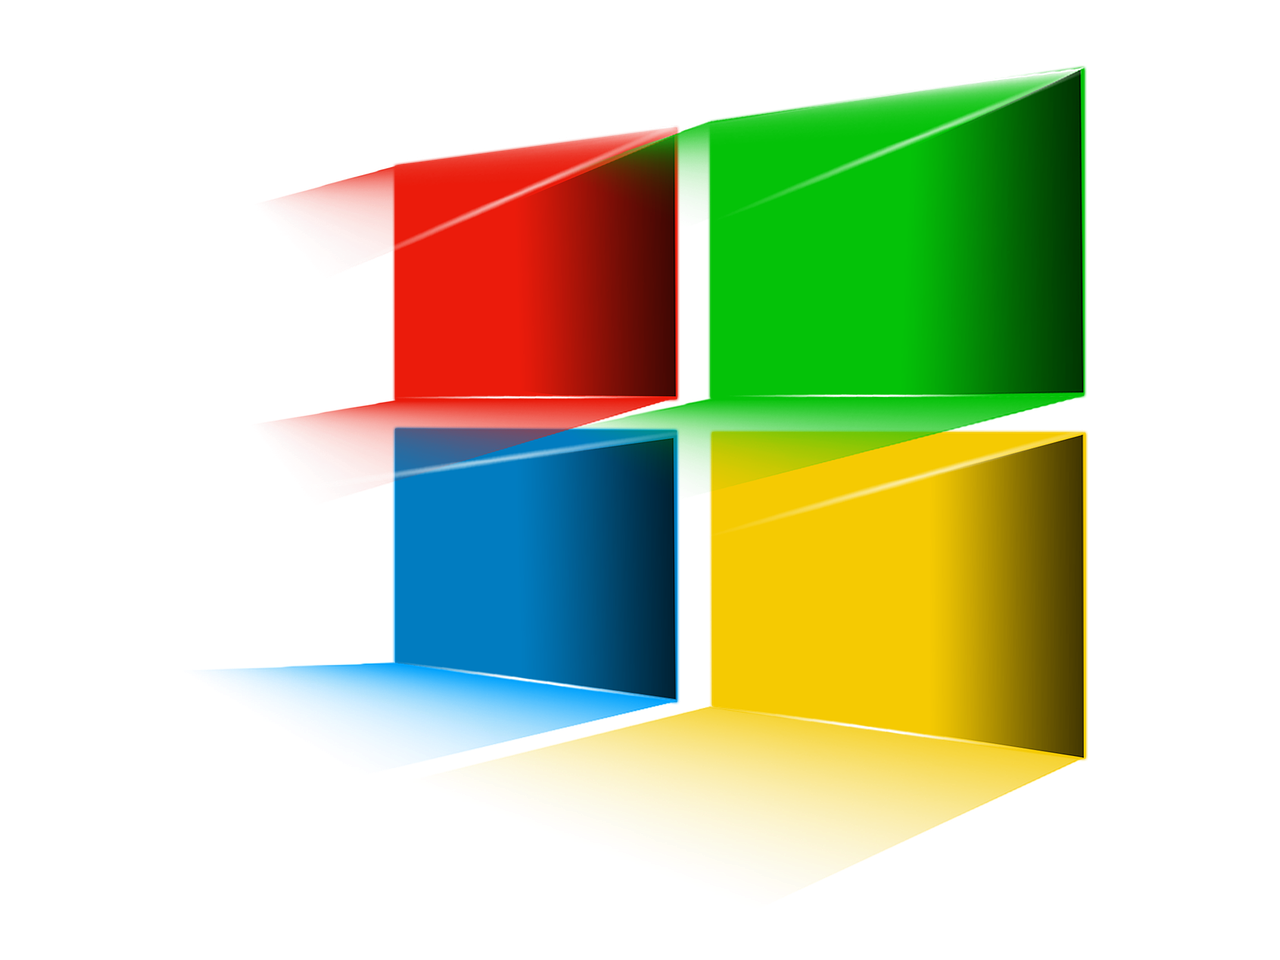 the windows 7 logo on a black background, a computer rendering, computer art, art style of polygon1993, style of mirror\'s edge, various colors, viewpoint is to front and left